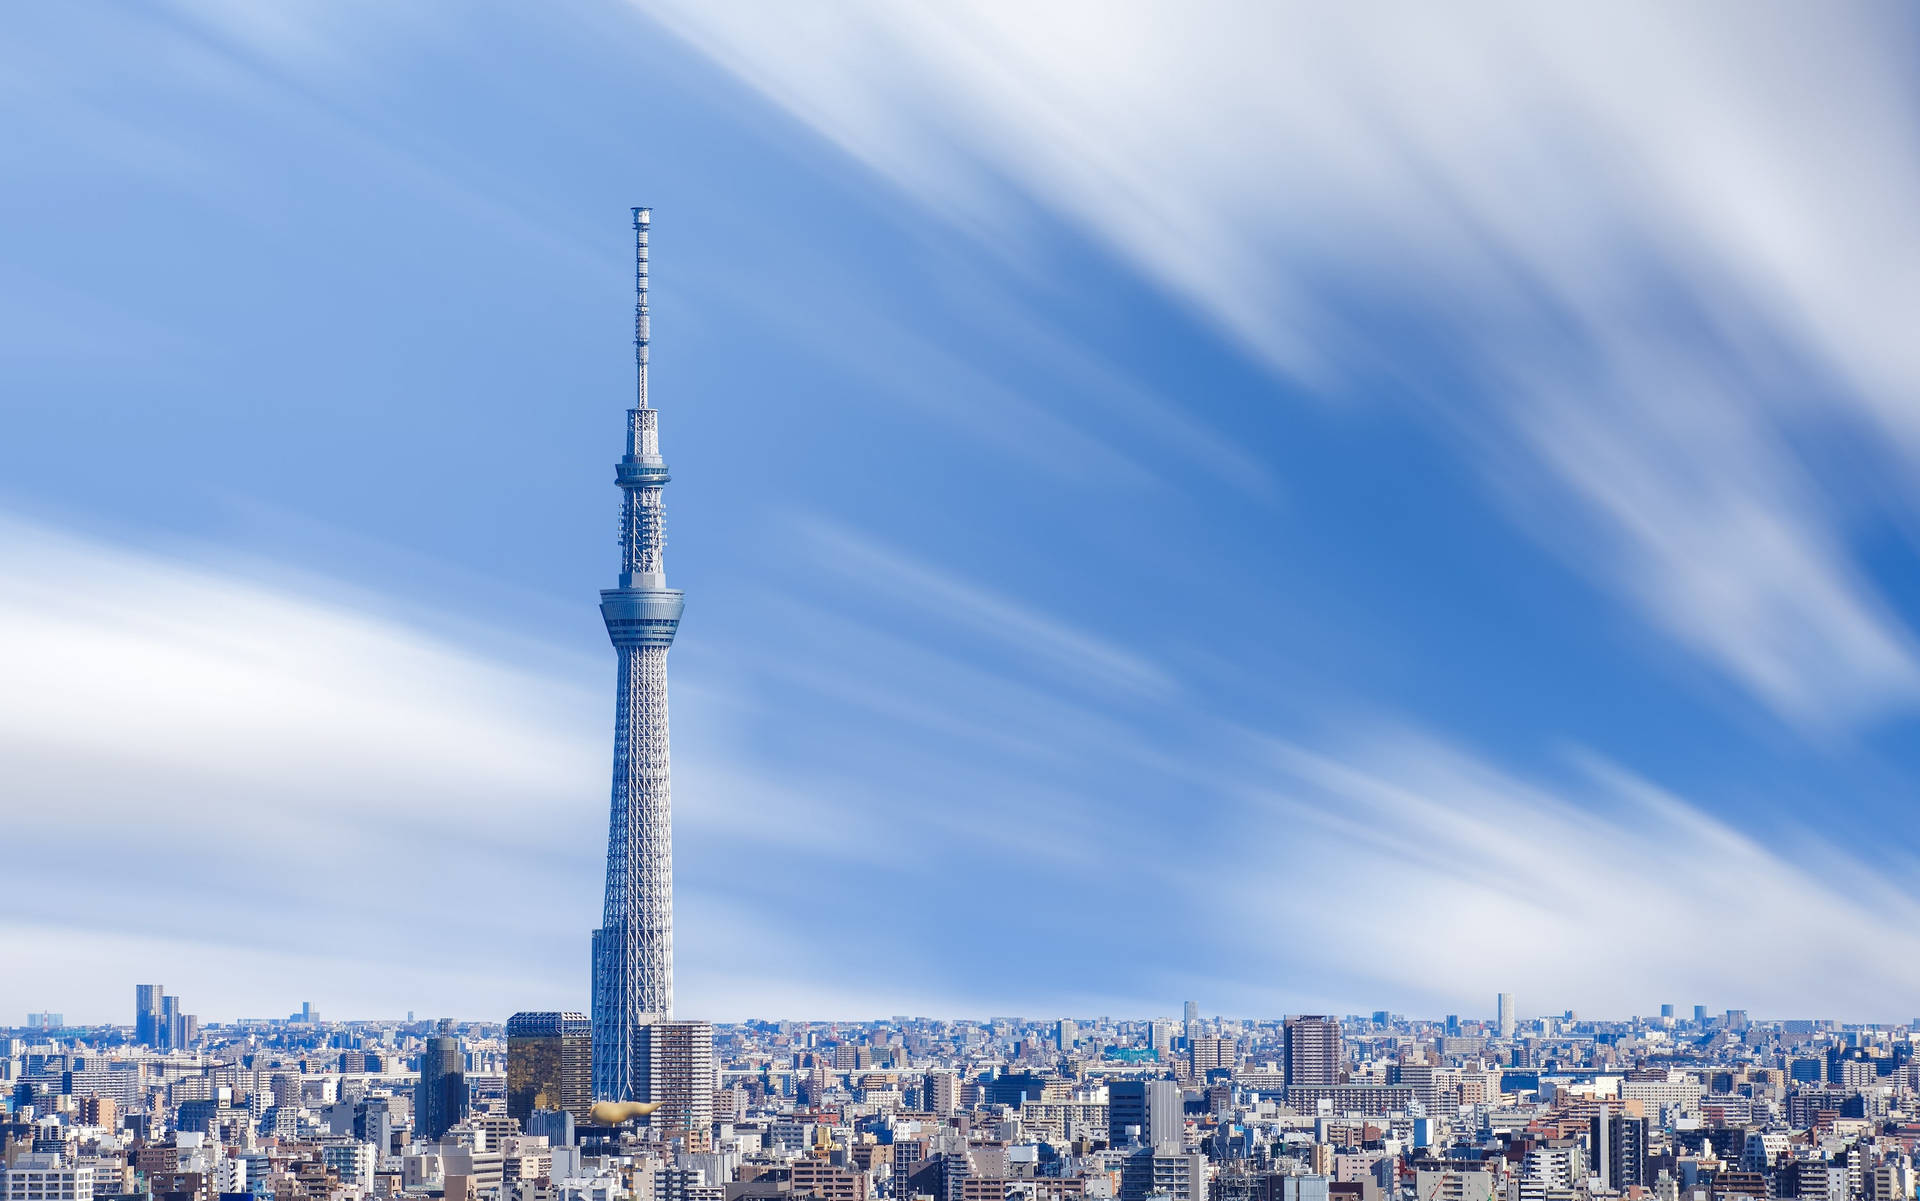 Tokyo Skytree High Rise Radio Tower Picture